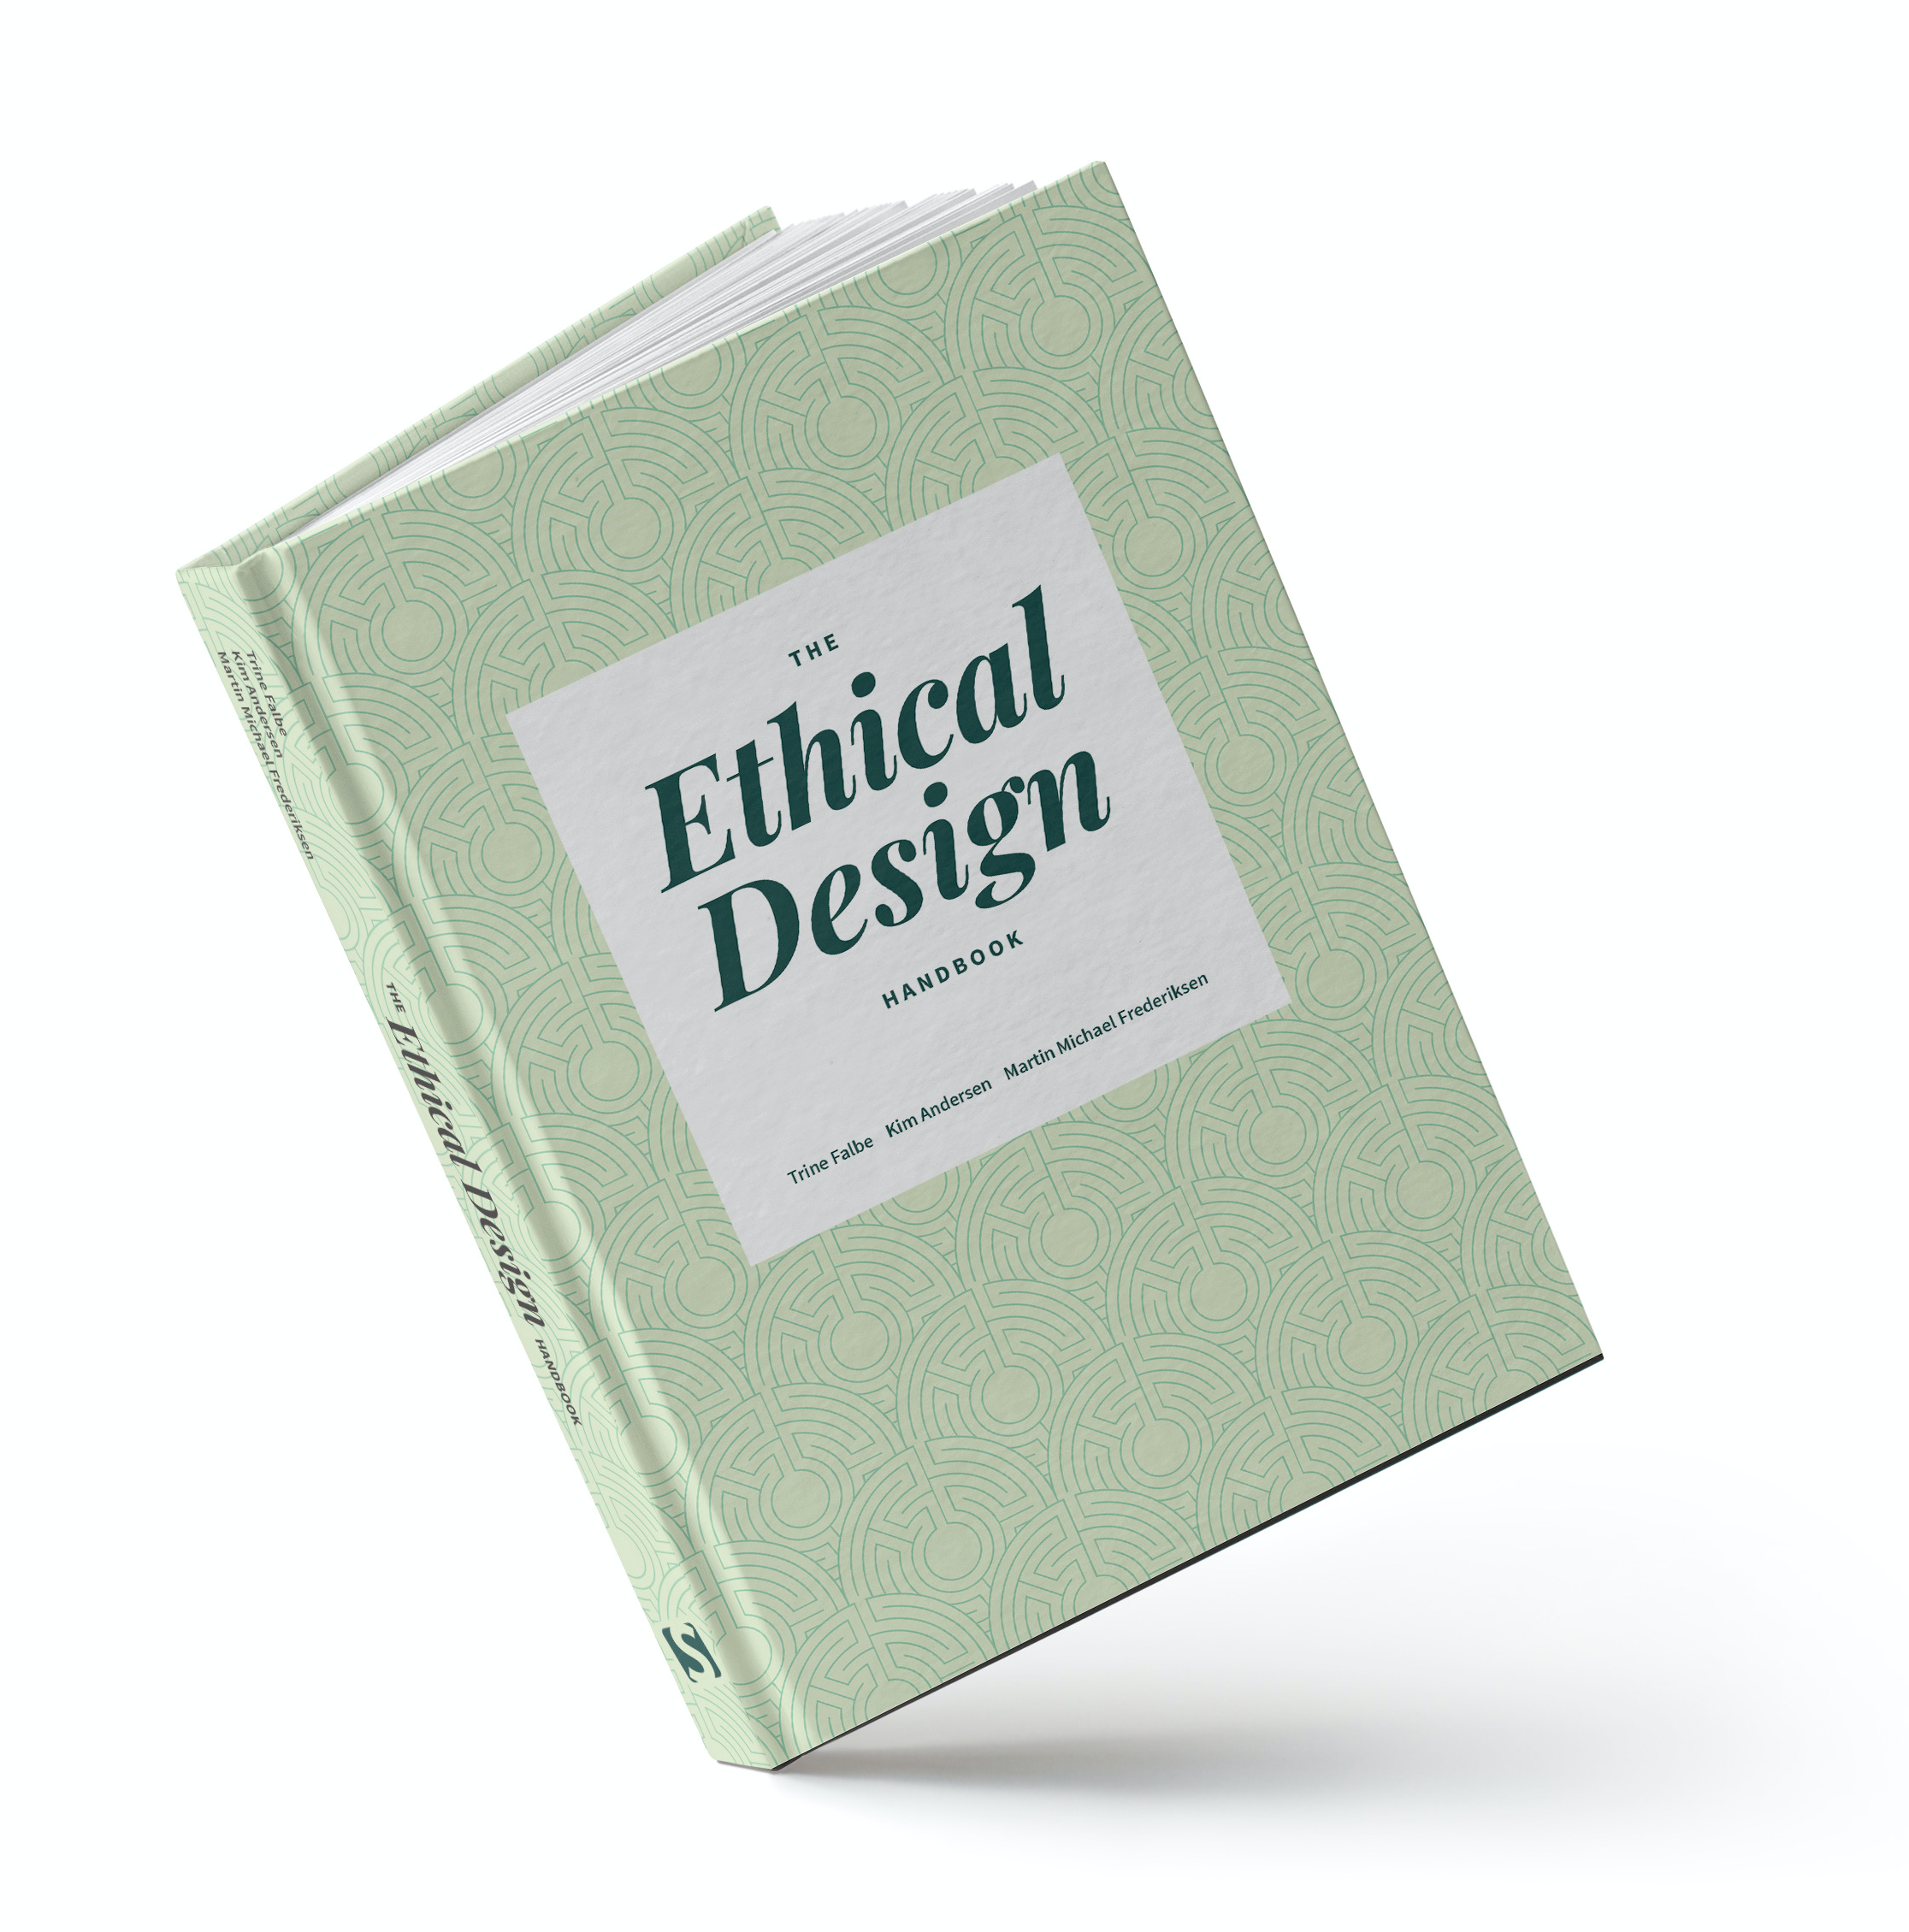 The cover of the Ethical Design Handbook